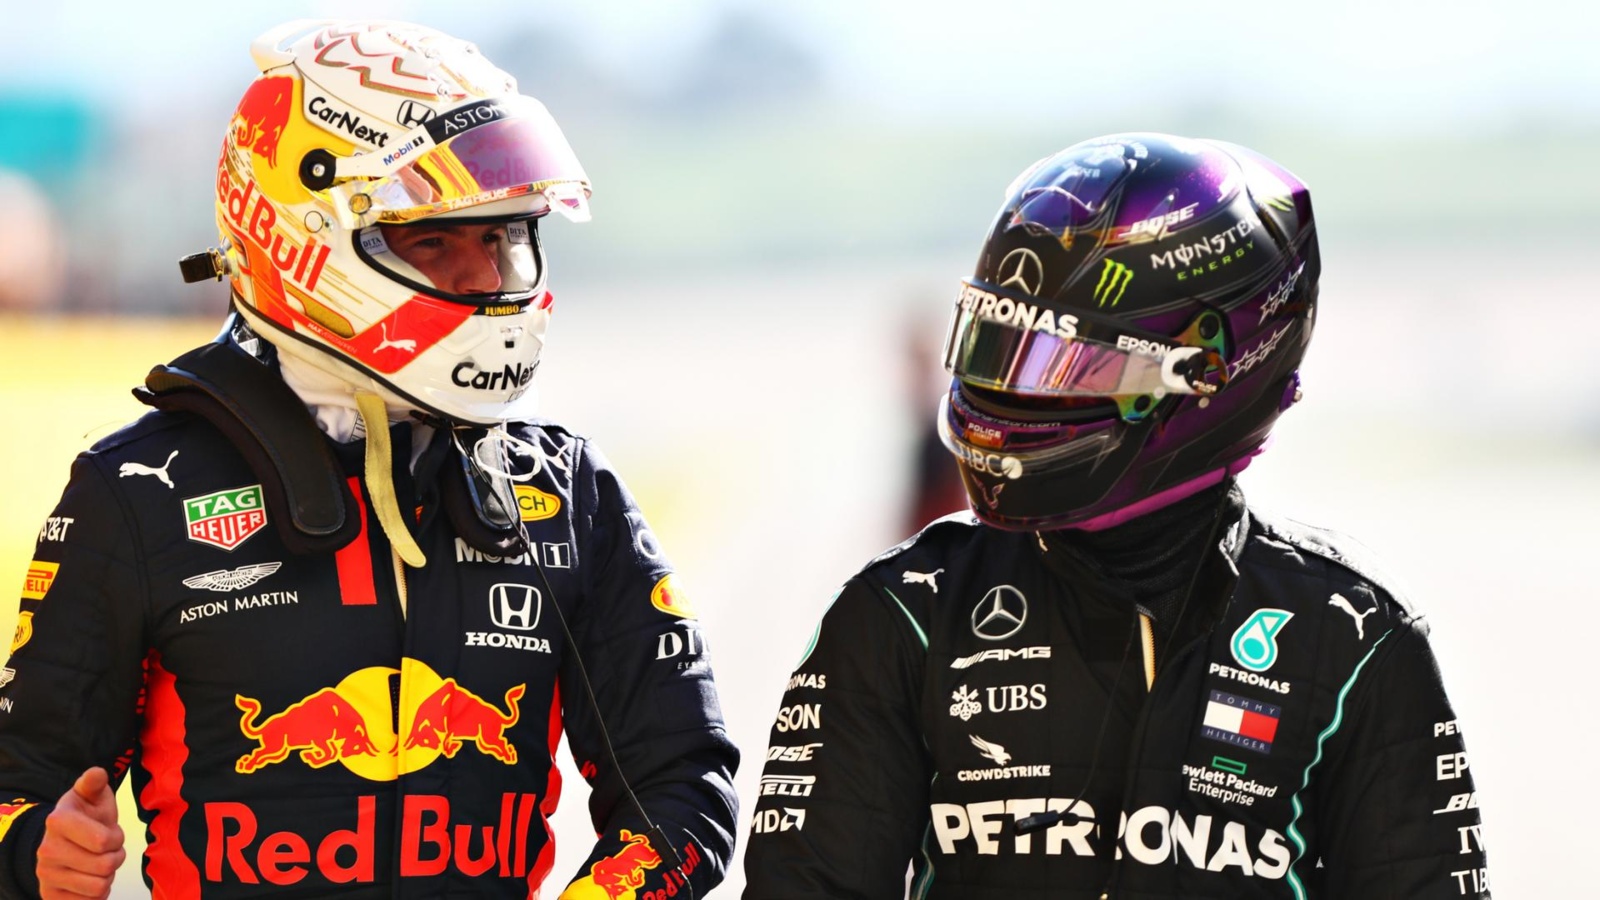 cerwzmni_626a4b423b1d9_verstappen-and-hamilton-are-very-good-friends-off-the-track.jpg